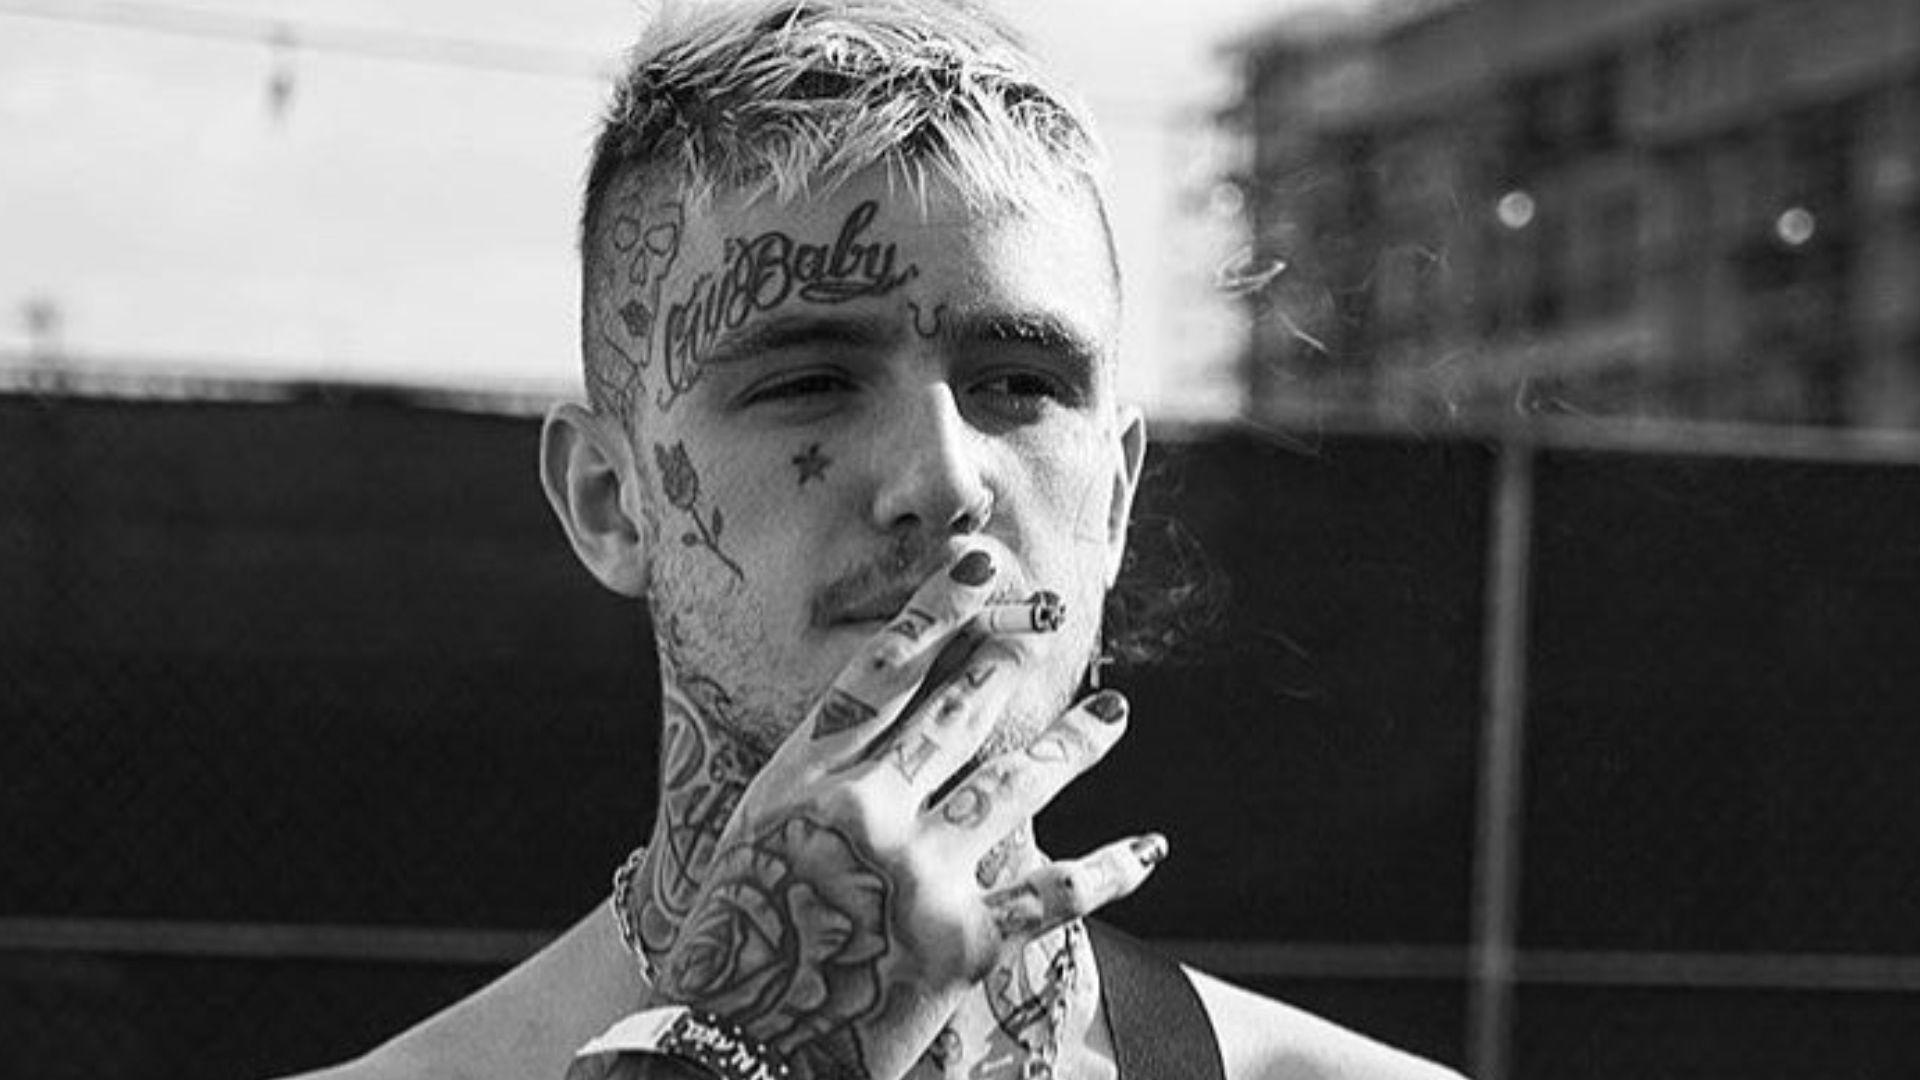 Lil Peep GOLD CHAINS ft. Clams Casino free MP3 download +